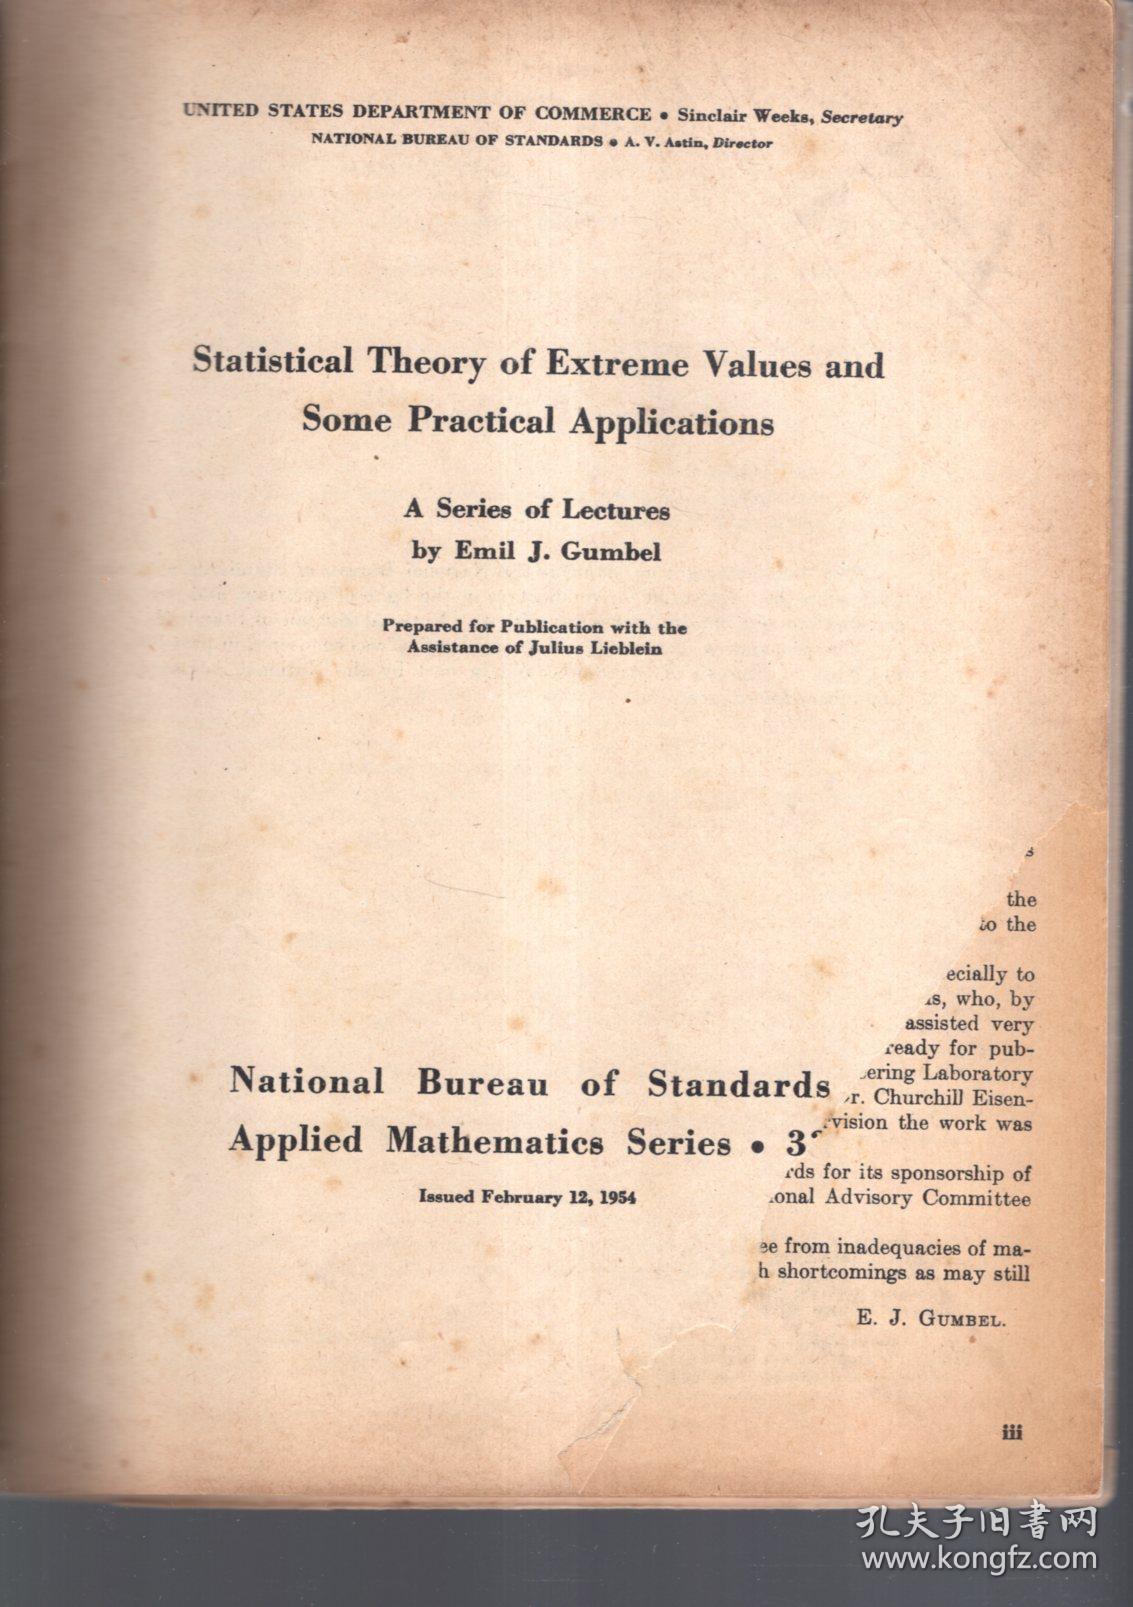 Statistical Theory of Extreme Values and Some Practical Applications